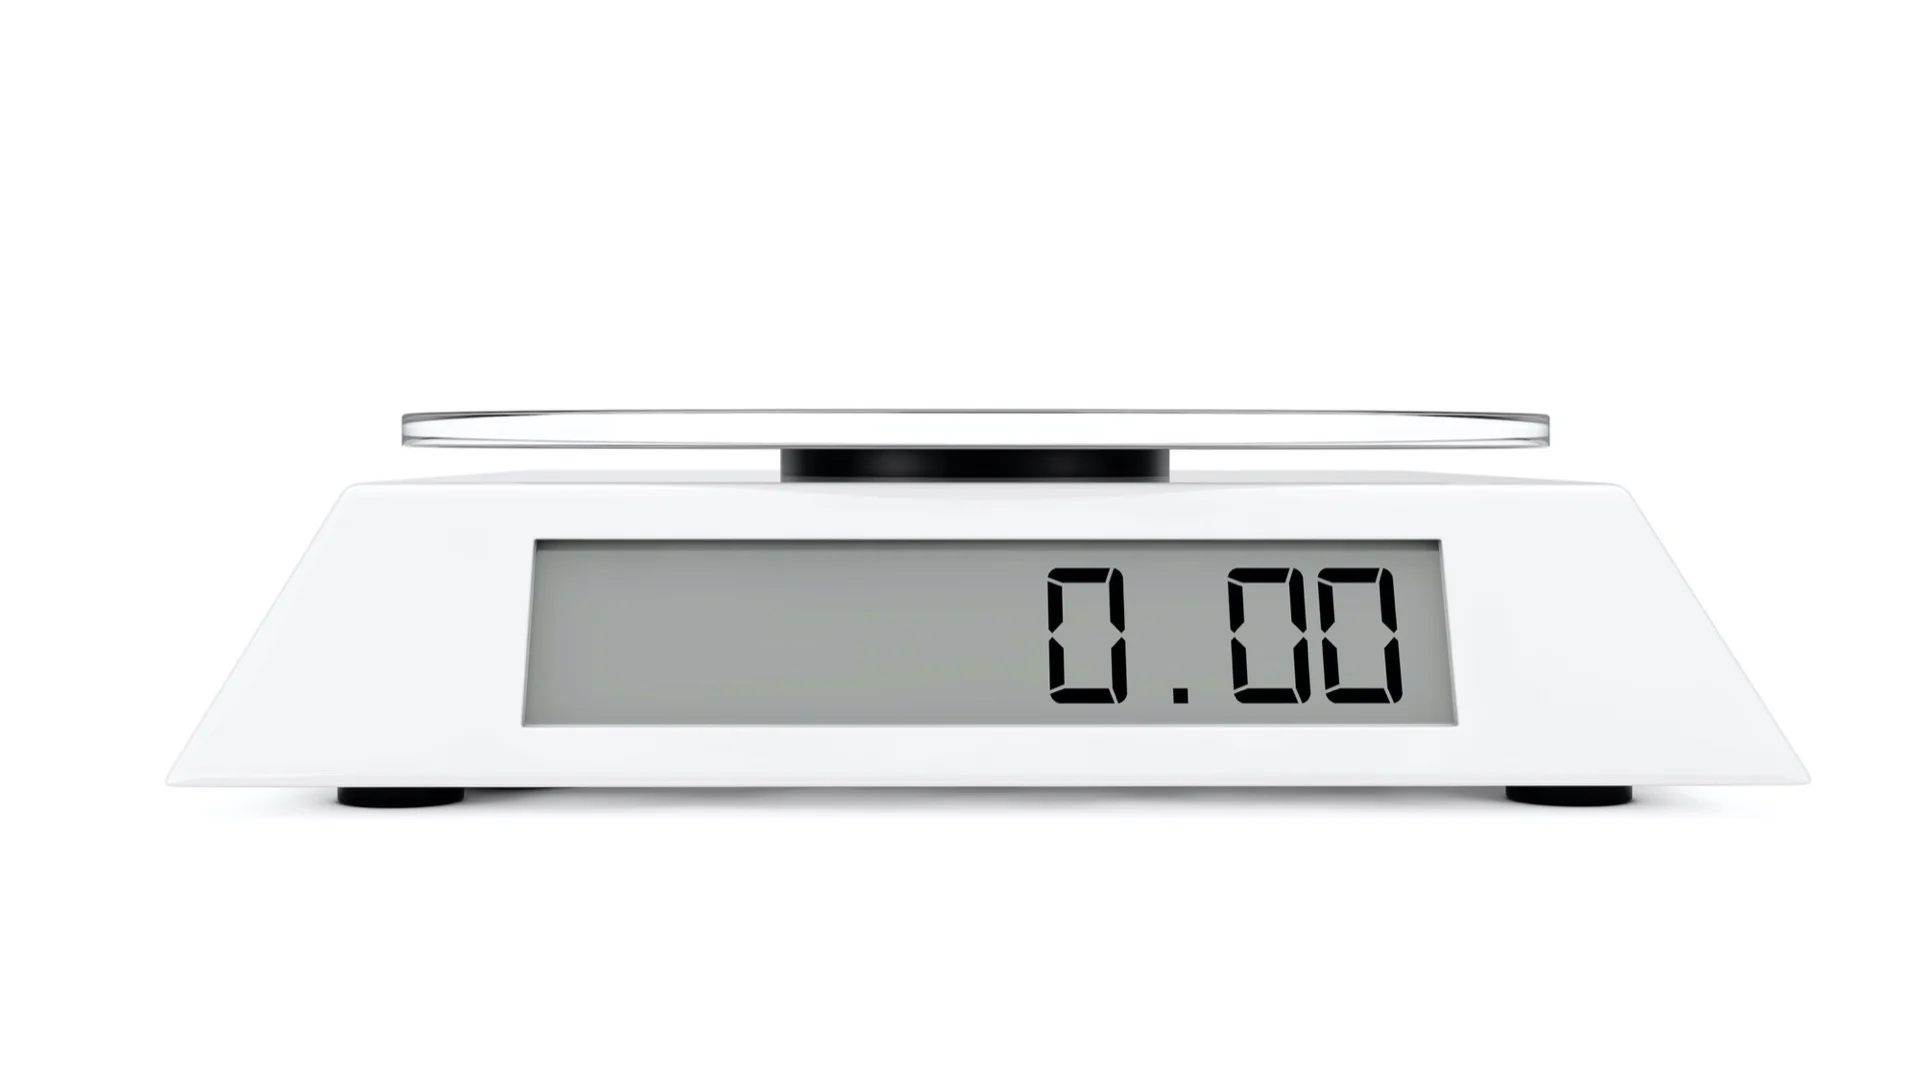 Use Digital Scales: They offer the most accurate measurements